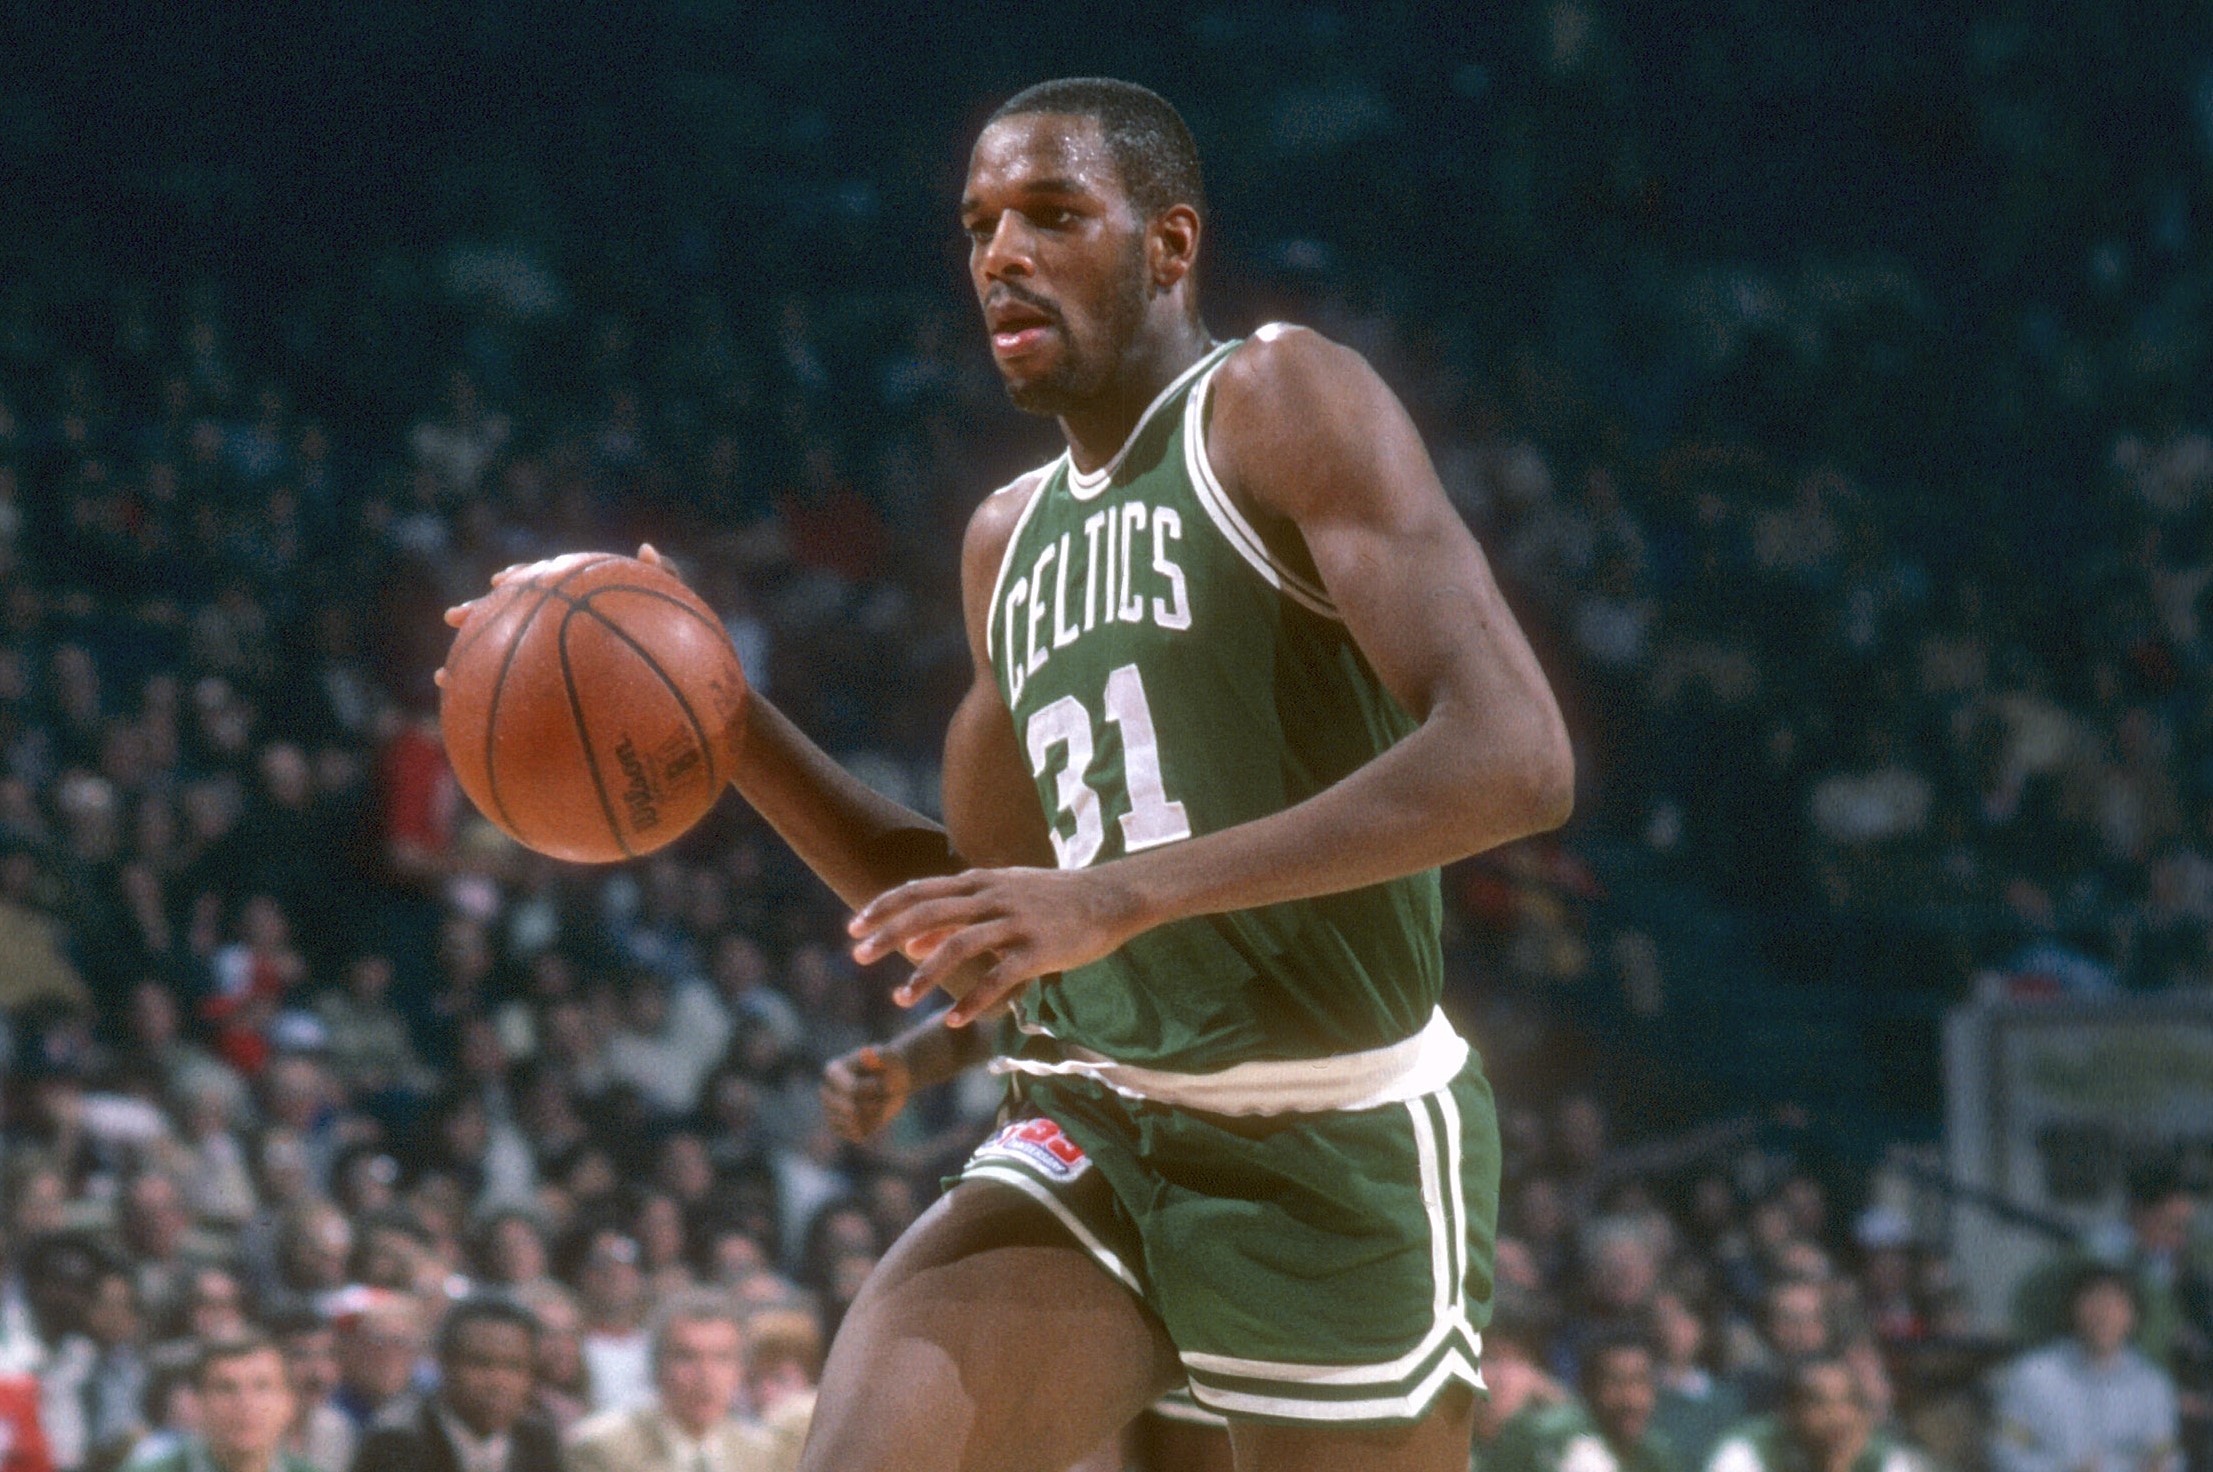 Cedric Maxwell of the Boston Celtics drives to the basket against the Washington Bullets.